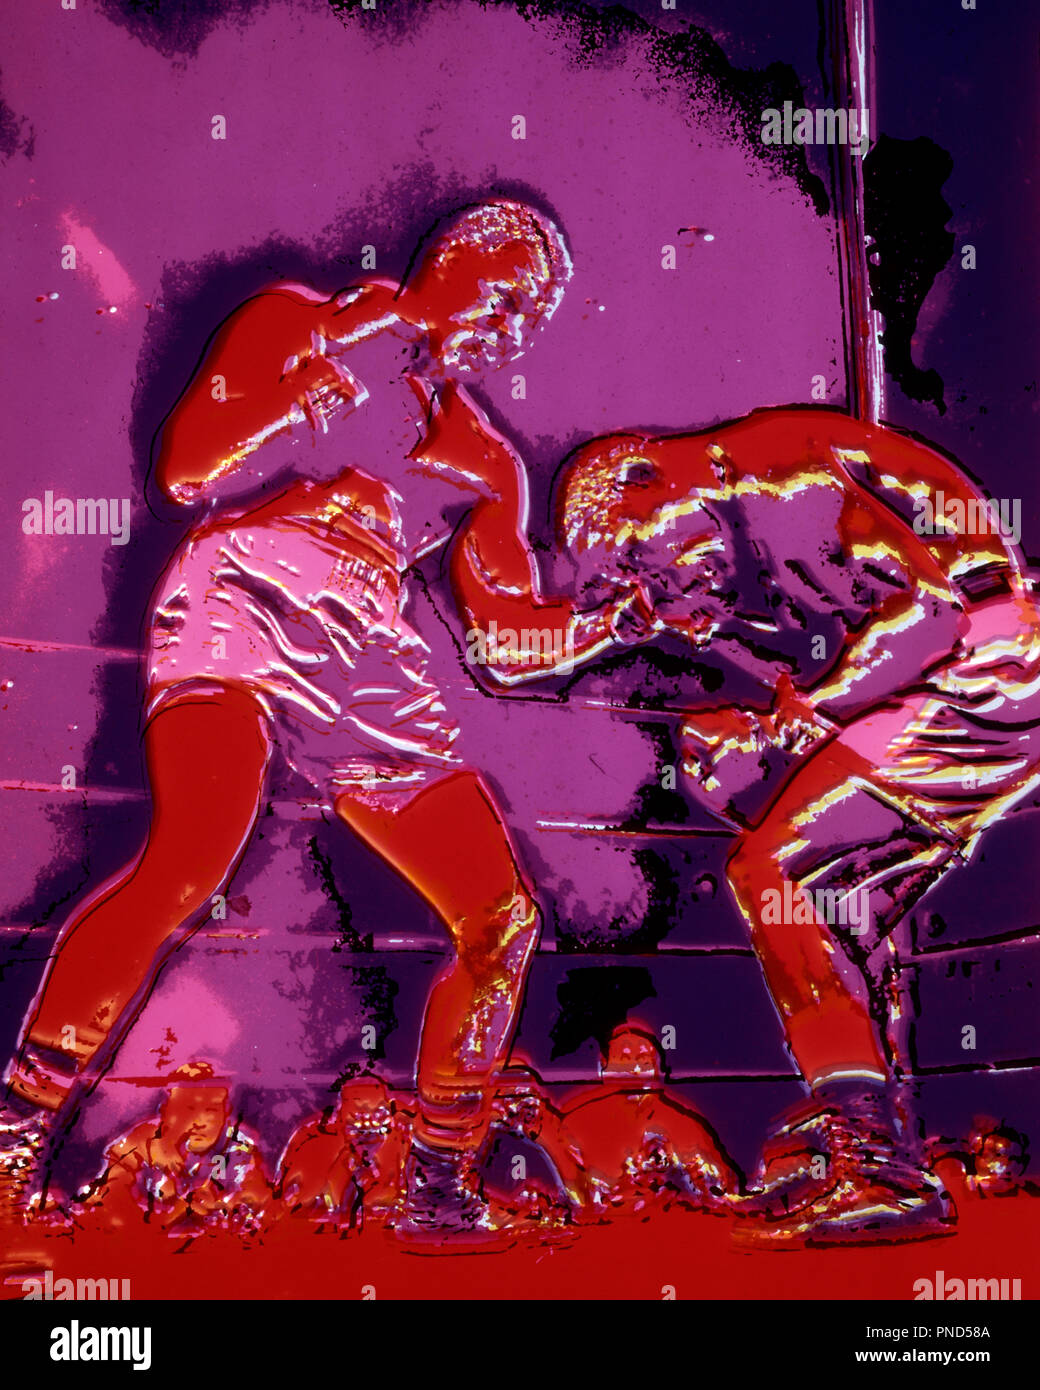 SOLARIZED TWO BOXERS IN THE RING  - ks9319 PHT001 HARS BATTLE LIFESTYLE CONFLICT VERTICAL WINNING BLOW EVENT GROWNUP COPY SPACE FULL-LENGTH PHYSICAL FITNESS PERSONS WINNER MATCH GROWN-UP MALES RISK ENTERTAINMENT HIT HITTING SADNESS GOALS OCCUPATION PURPLE SPORTING BOXERS PROTECTION STRENGTH EXCITEMENT LOW ANGLE POWERFUL PRIZE STRIKE EFFECT COMPETING OCCUPATIONS PUNCHING PROFESSIONAL SPORTS CONNECTION MOTION BLUR BOXING GLOVE CONCEPTUAL BOXING GLOVES IMAGINATION PUGILIST LOOSING OPPONENT COMPETITOR COMPETITORS CONFLICTING MID-ADULT MID-ADULT MAN OPPONENTS PRIZE RING STRIKING YOUNG ADULT MAN Stock Photo